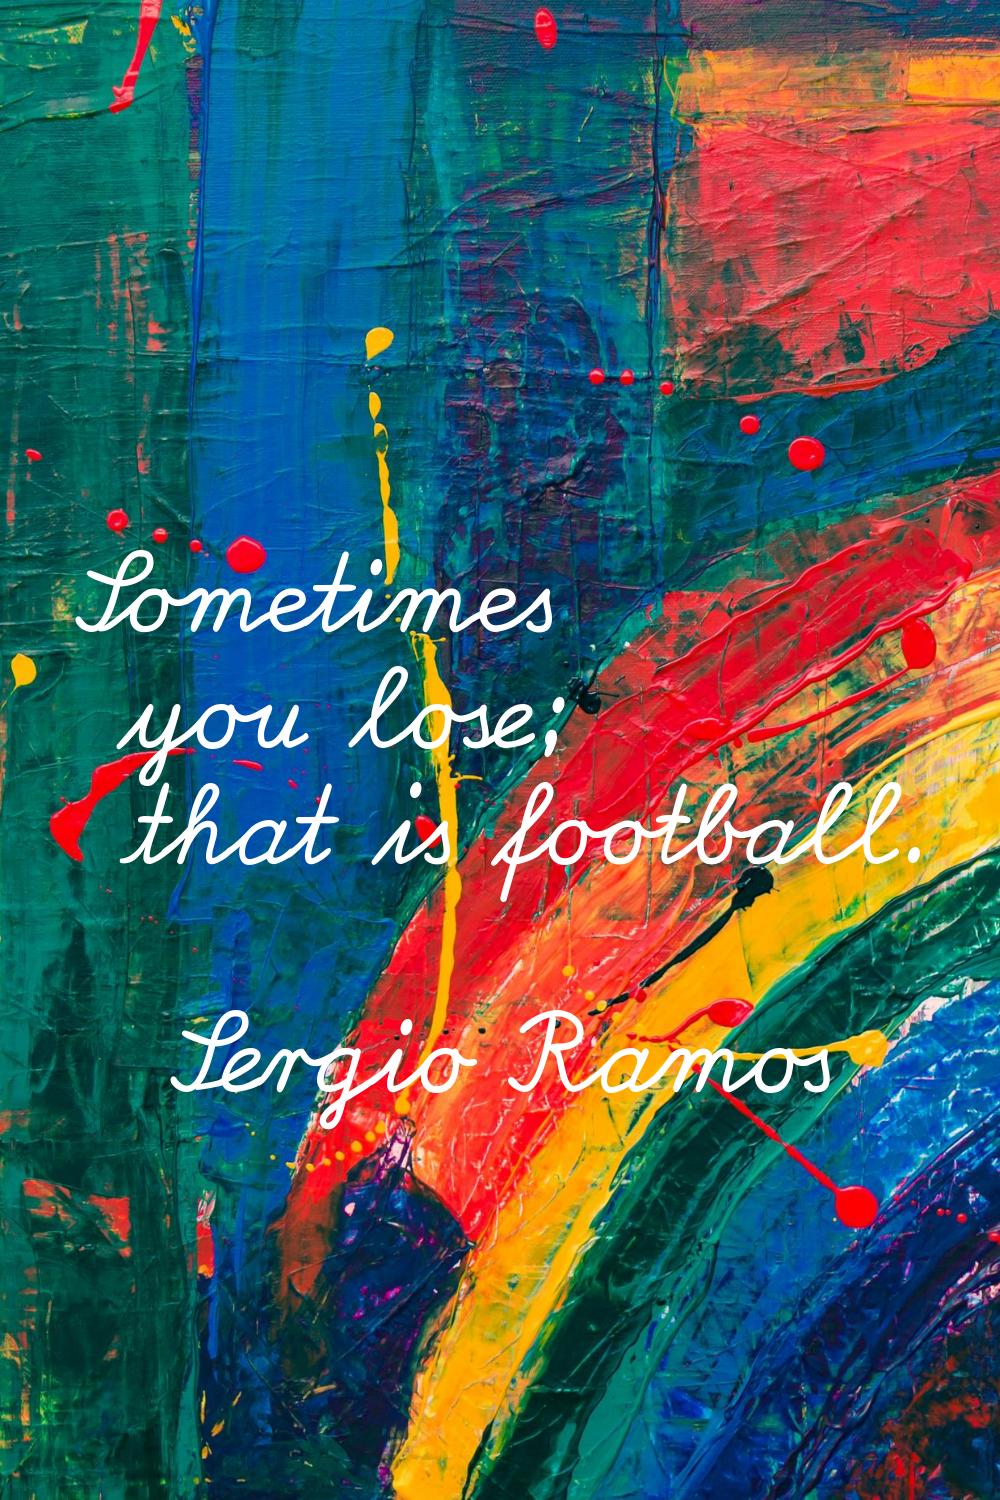 Sometimes you lose; that is football.